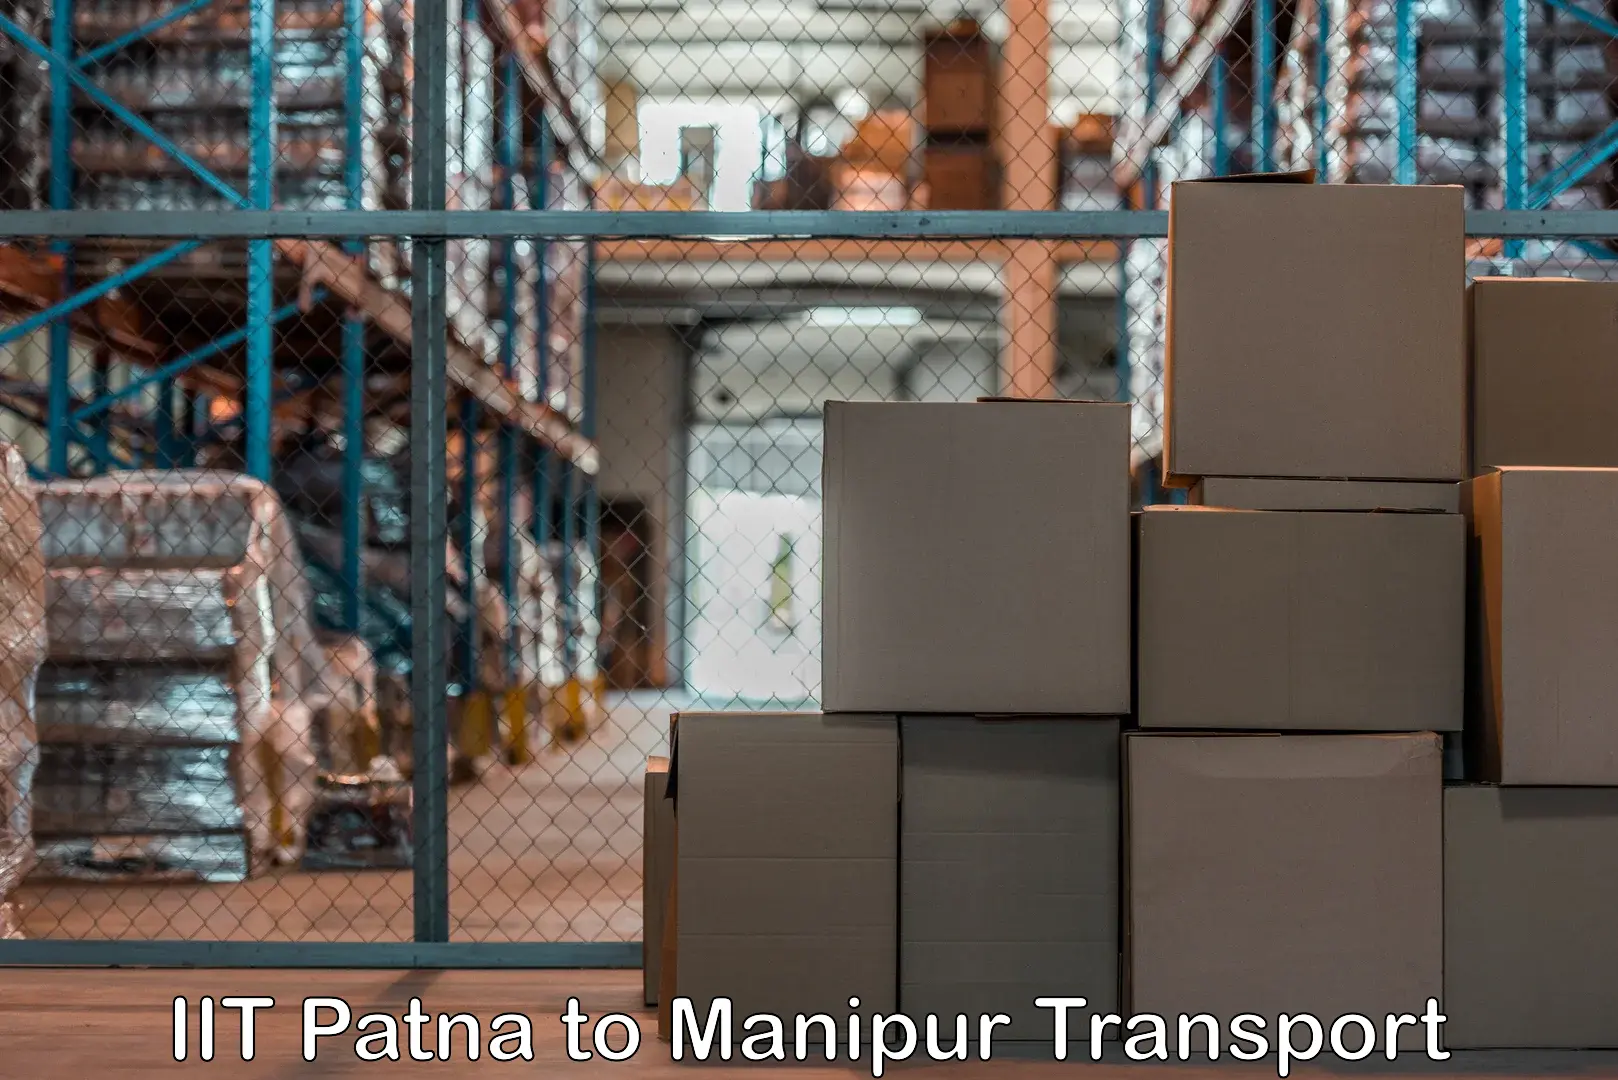 Daily parcel service transport IIT Patna to Imphal